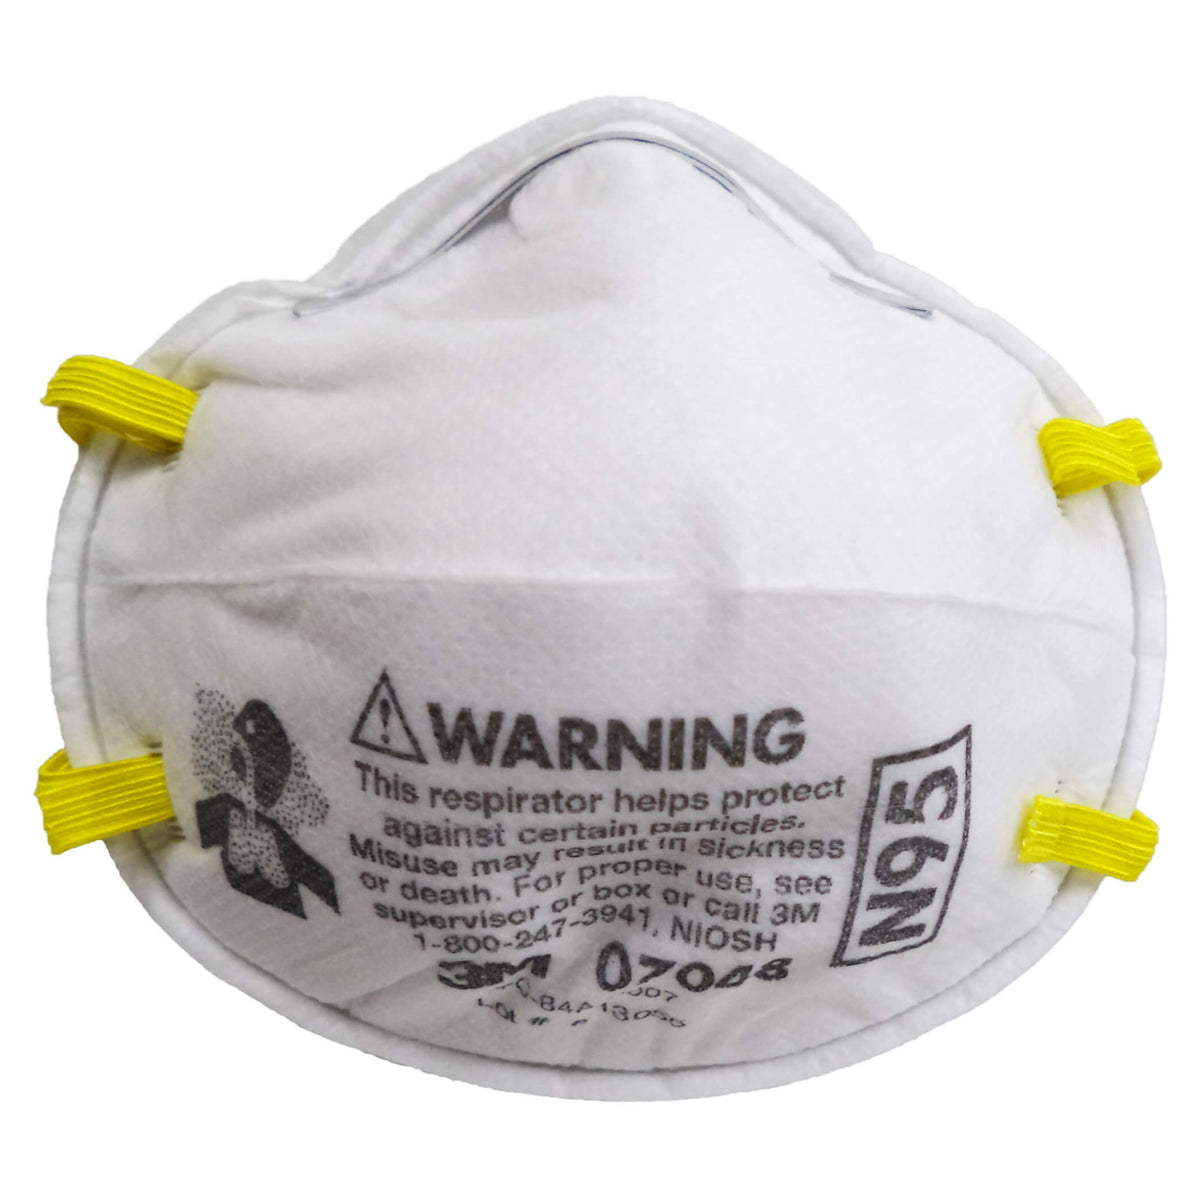 Particulate Respirator Mask (N95) (3M 07048)